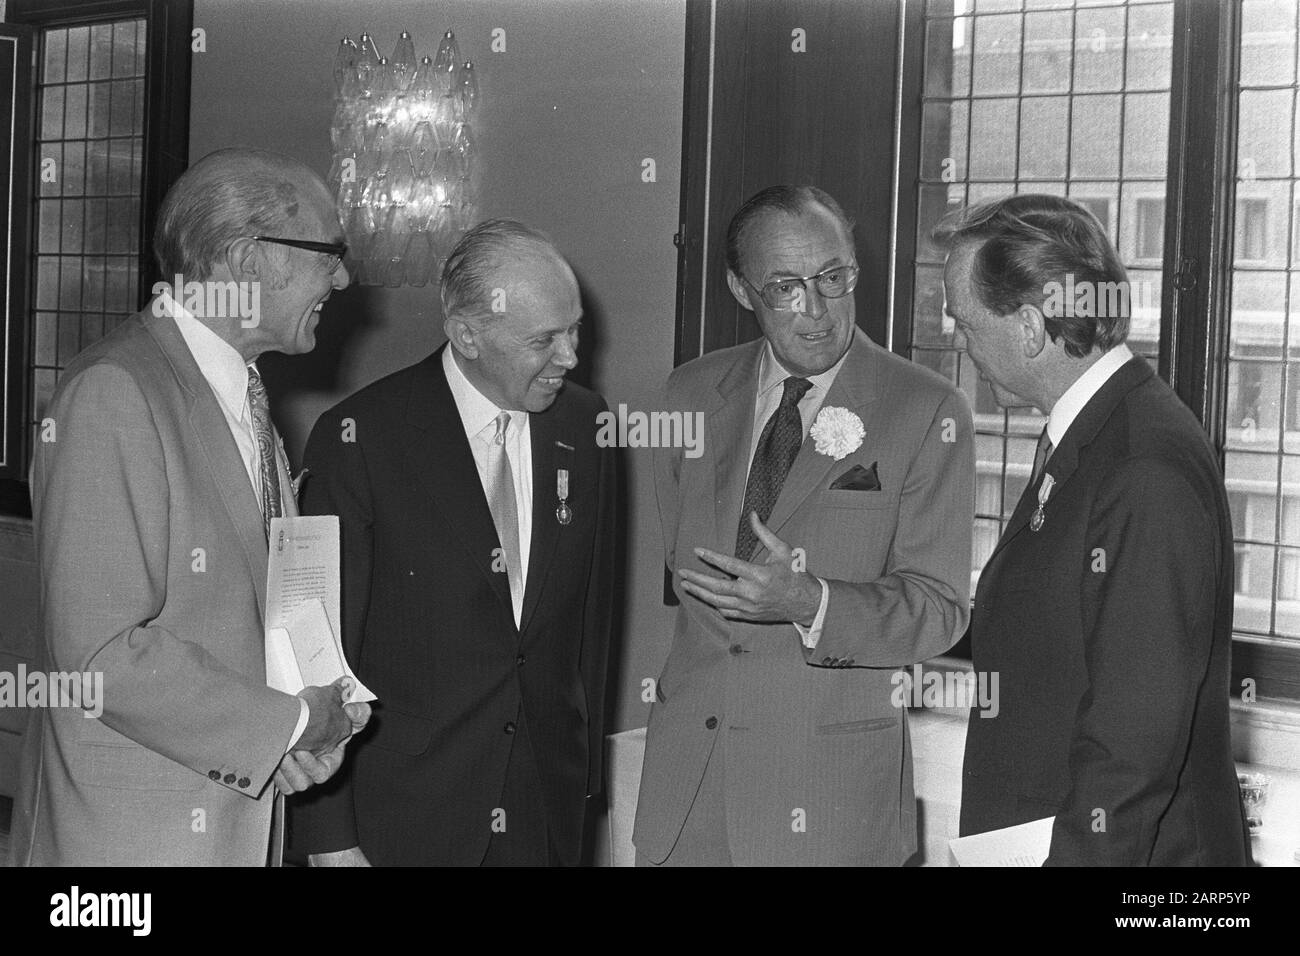 Prins Bernhard presents silver carnations in Paleis op de Dam  V.l.n.r. Mr. Frans Nieuwboer, Mr. M. H. Goose, Prince Bernhard and Mr. L. G. le Roy, during the awards ceremony at the Palace on the Dam in Amsterdam Date: 27 June 1972 Location: Amsterdam, Noord-Holland Keywords: awards, palaces, awards, princes Personal name: Bernhard (prince Netherlands), Nieuwboer, French, Roy, L.G. le Stock Photo